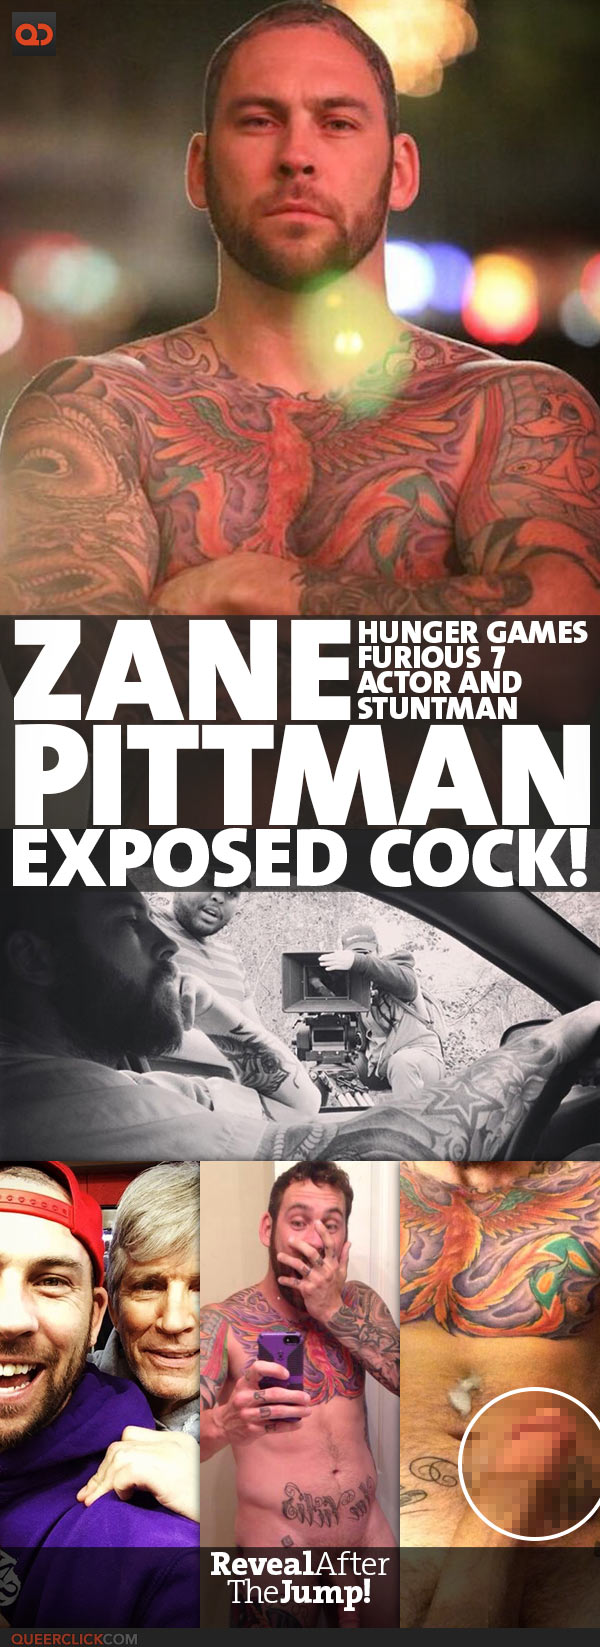 Zane Pittman, Hunger Games And Furious 7 Actor And Stuntman, Exposed Cock!